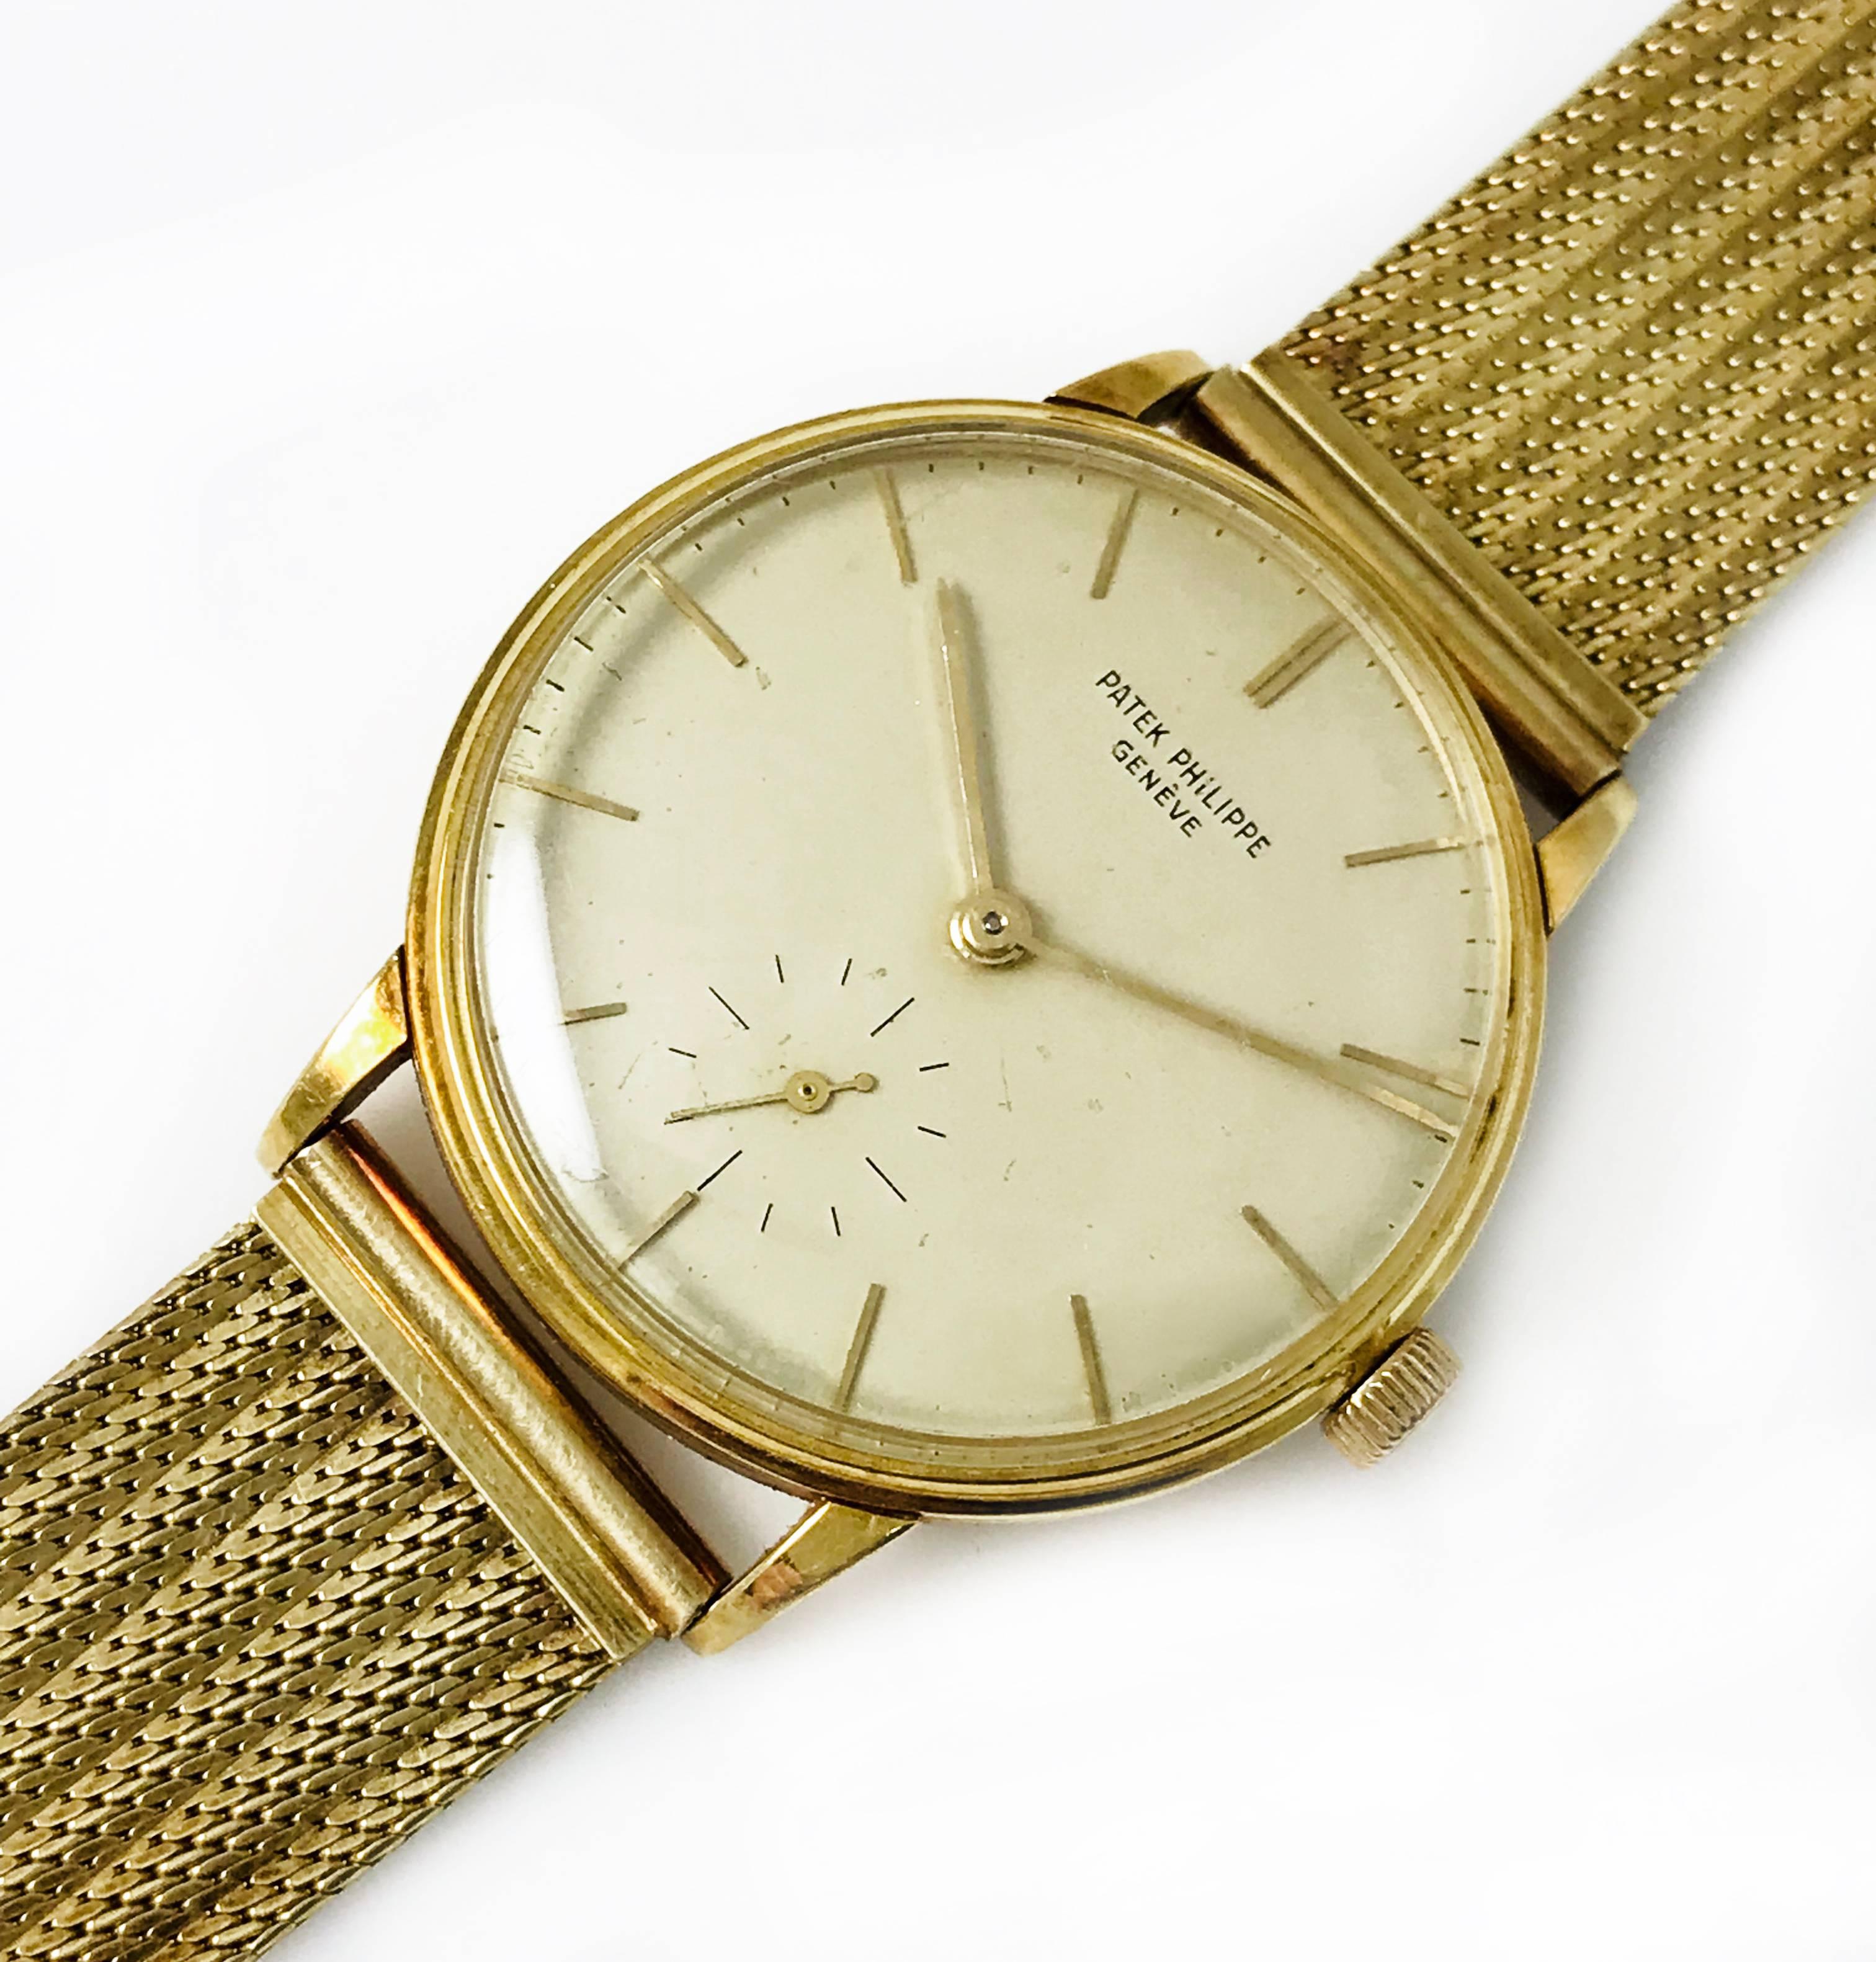 Patek Philippe & Co. Genéve 18k Gold case, 18 Jewels Watch. Gold baton-style hour and minute hands for dial and sub-dial, slight curve on the lugs, manual wind movement. Inscribed on the inside of the back of the timepiece is Serial #7318835